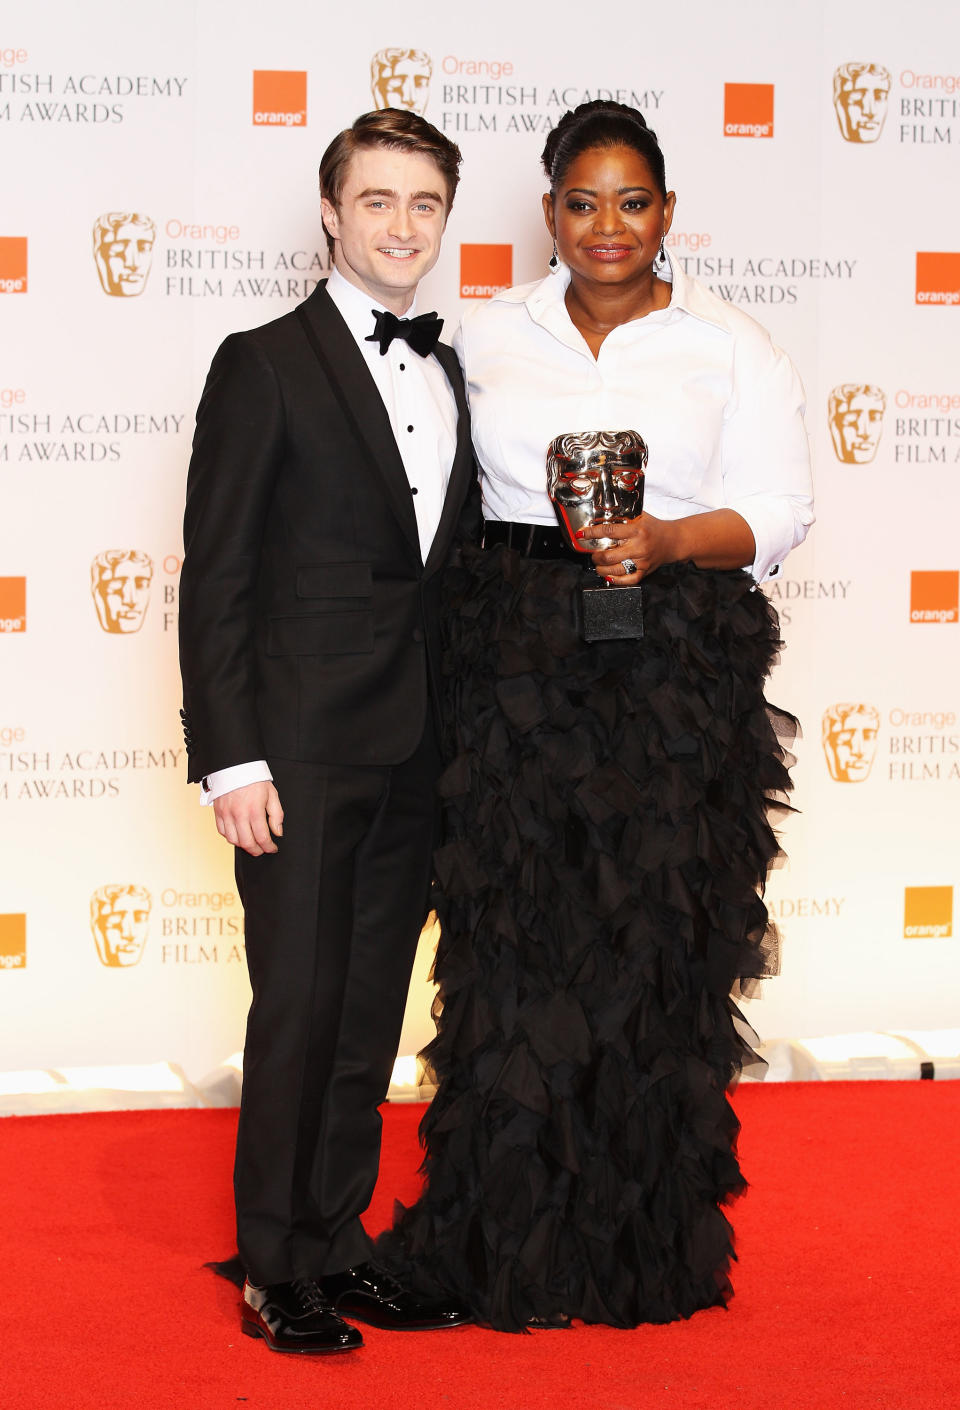 LONDON, ENGLAND - FEBRUARY 12: Best Supporting Actress winner Octavia Spencer poses in the press room with actor Daniel Radcliffe during the Orange British Academy Film Awards 2012 at the Royal Opera House on February 12, 2012 in London, England. (Photo by Chris Jackson/Getty Images)